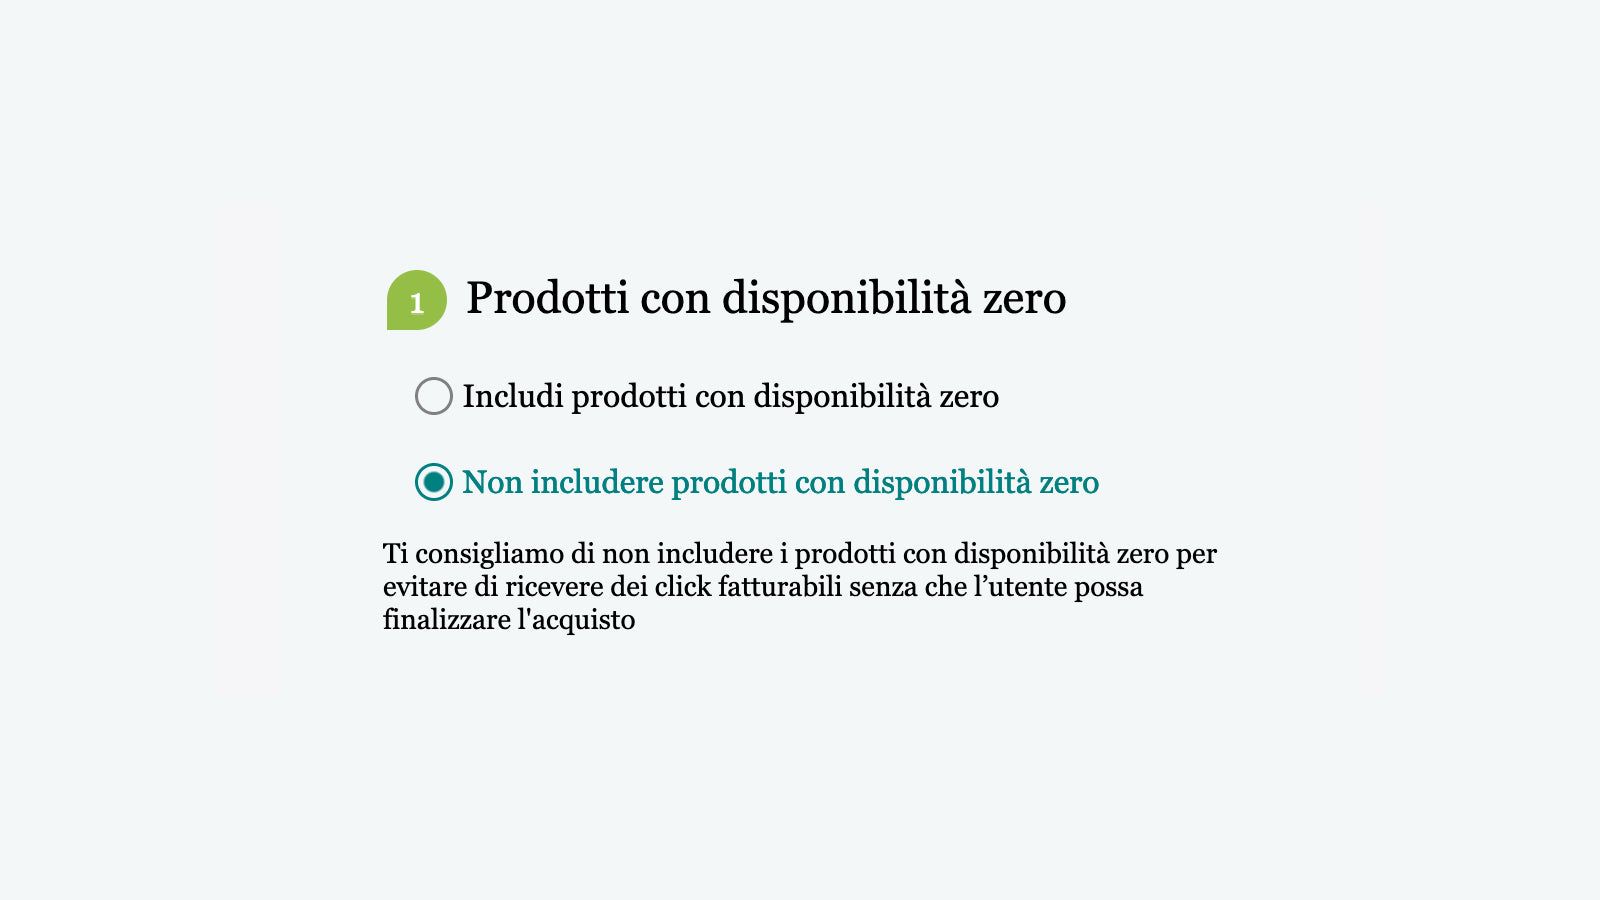 Exclude zero availability products